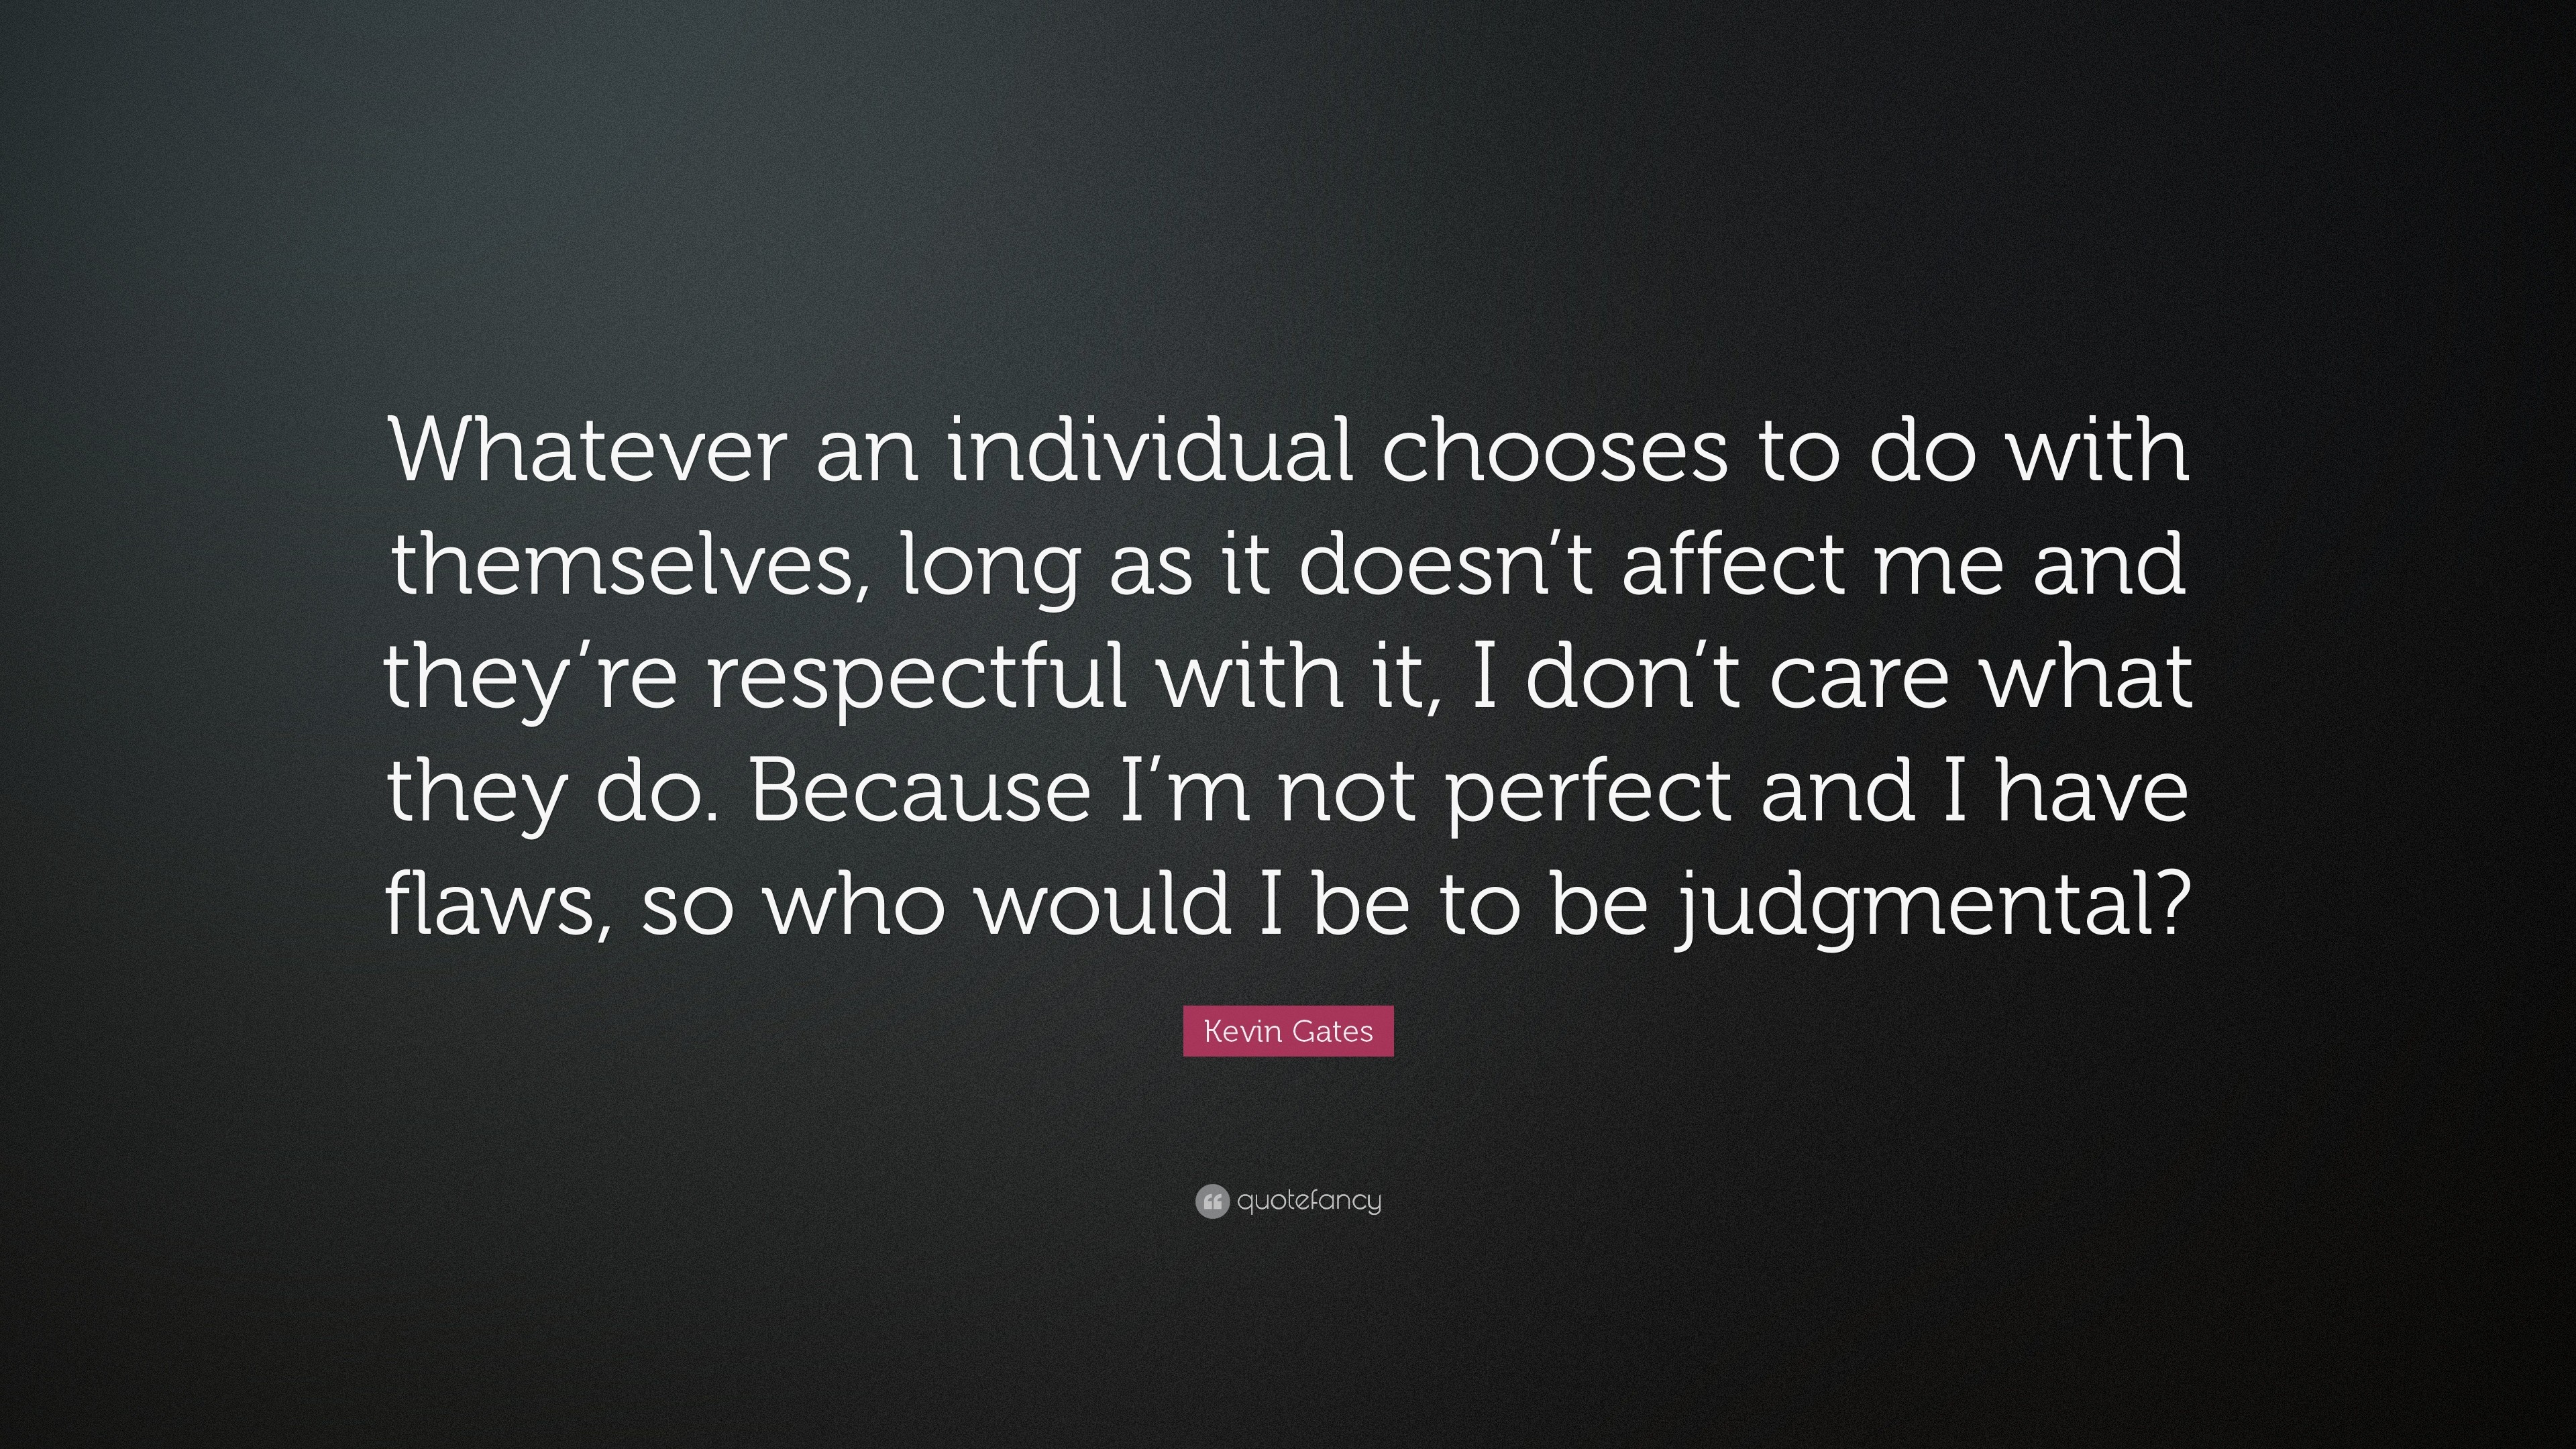 3840x2160 Kevin Gates Quote: “Whatever an individual chooses to do with themselves,  long as